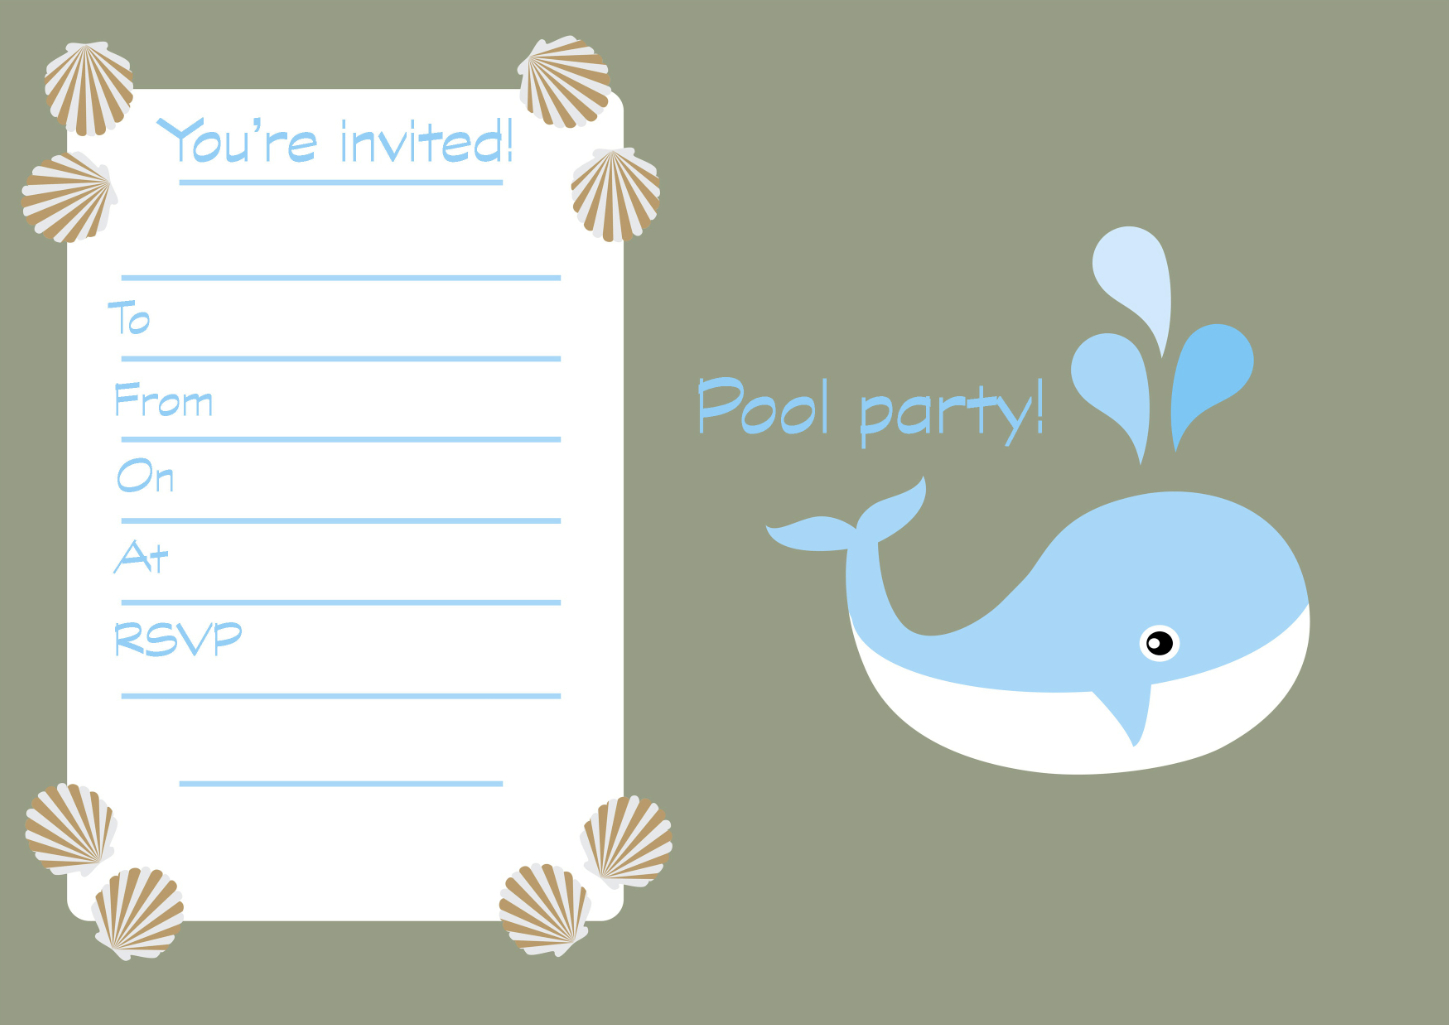 45 Pool Party Invitations | Kittybabylove - Free Printable Pool Party Birthday Invitations